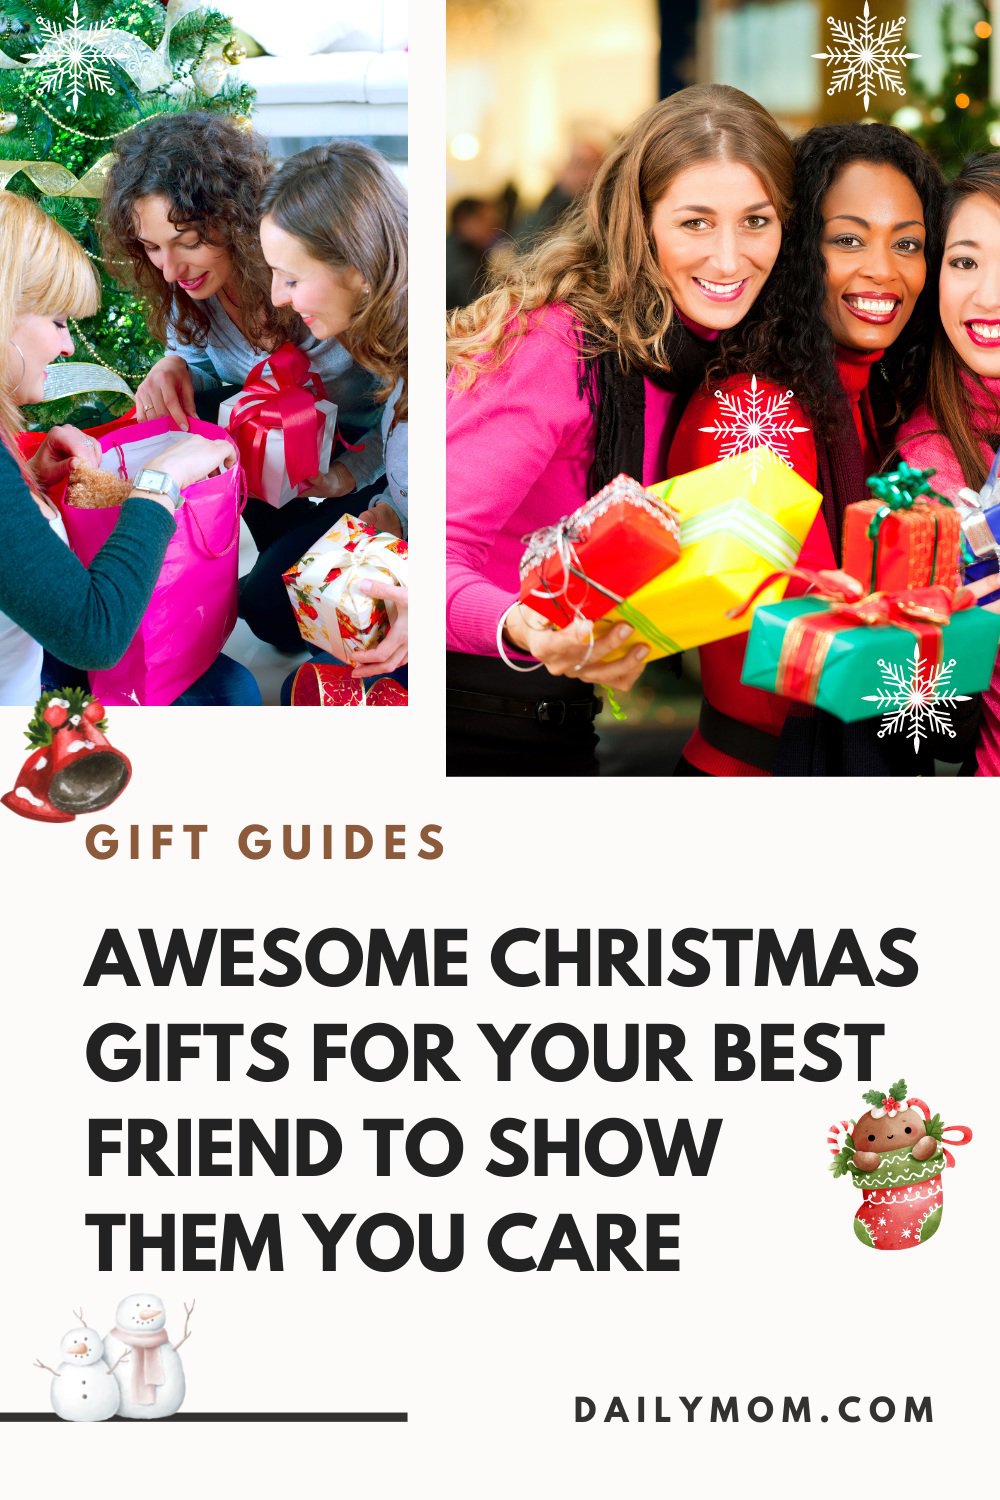 25 Awesome Christmas Gifts For Your Best Friend To Show Them You Care